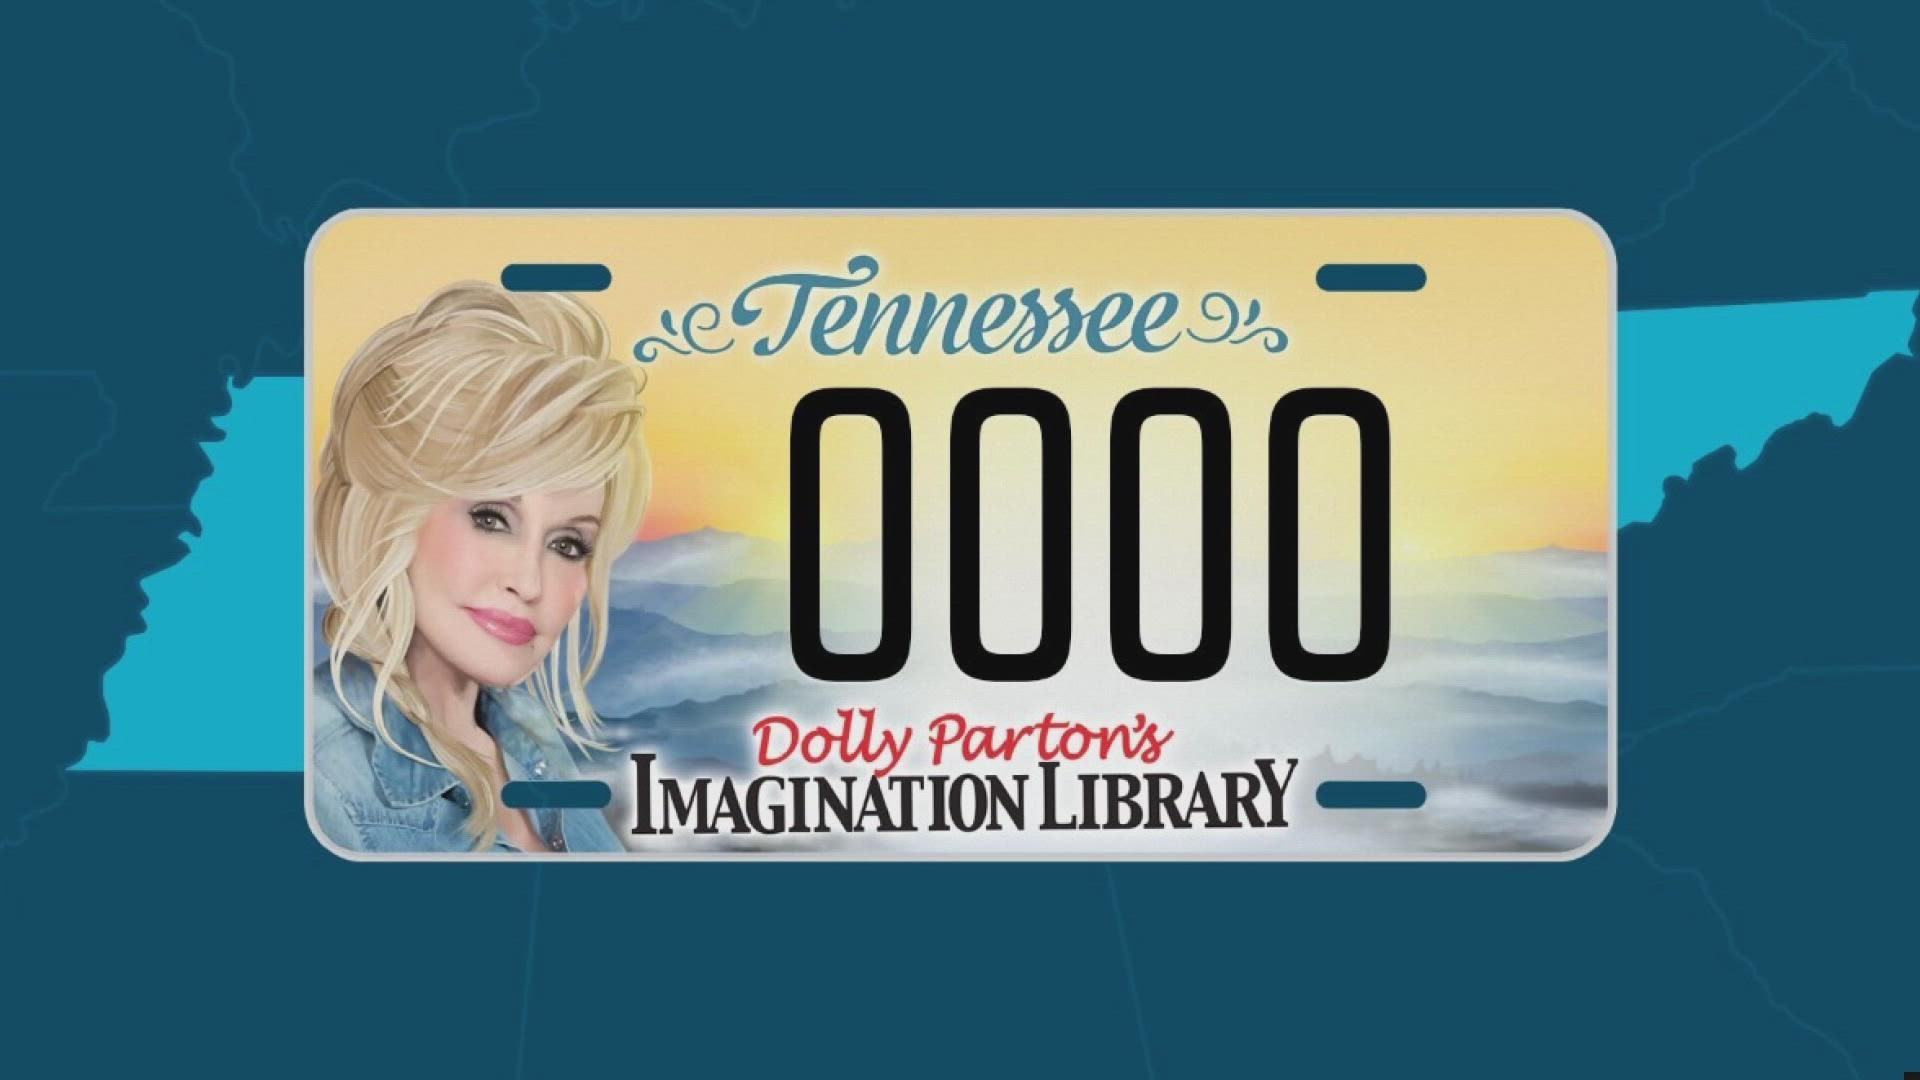 All Tennessee drivers are required to get new license plates. They can choose a Dolly Parton license plate and support Imagination Library programs in Tennessee.